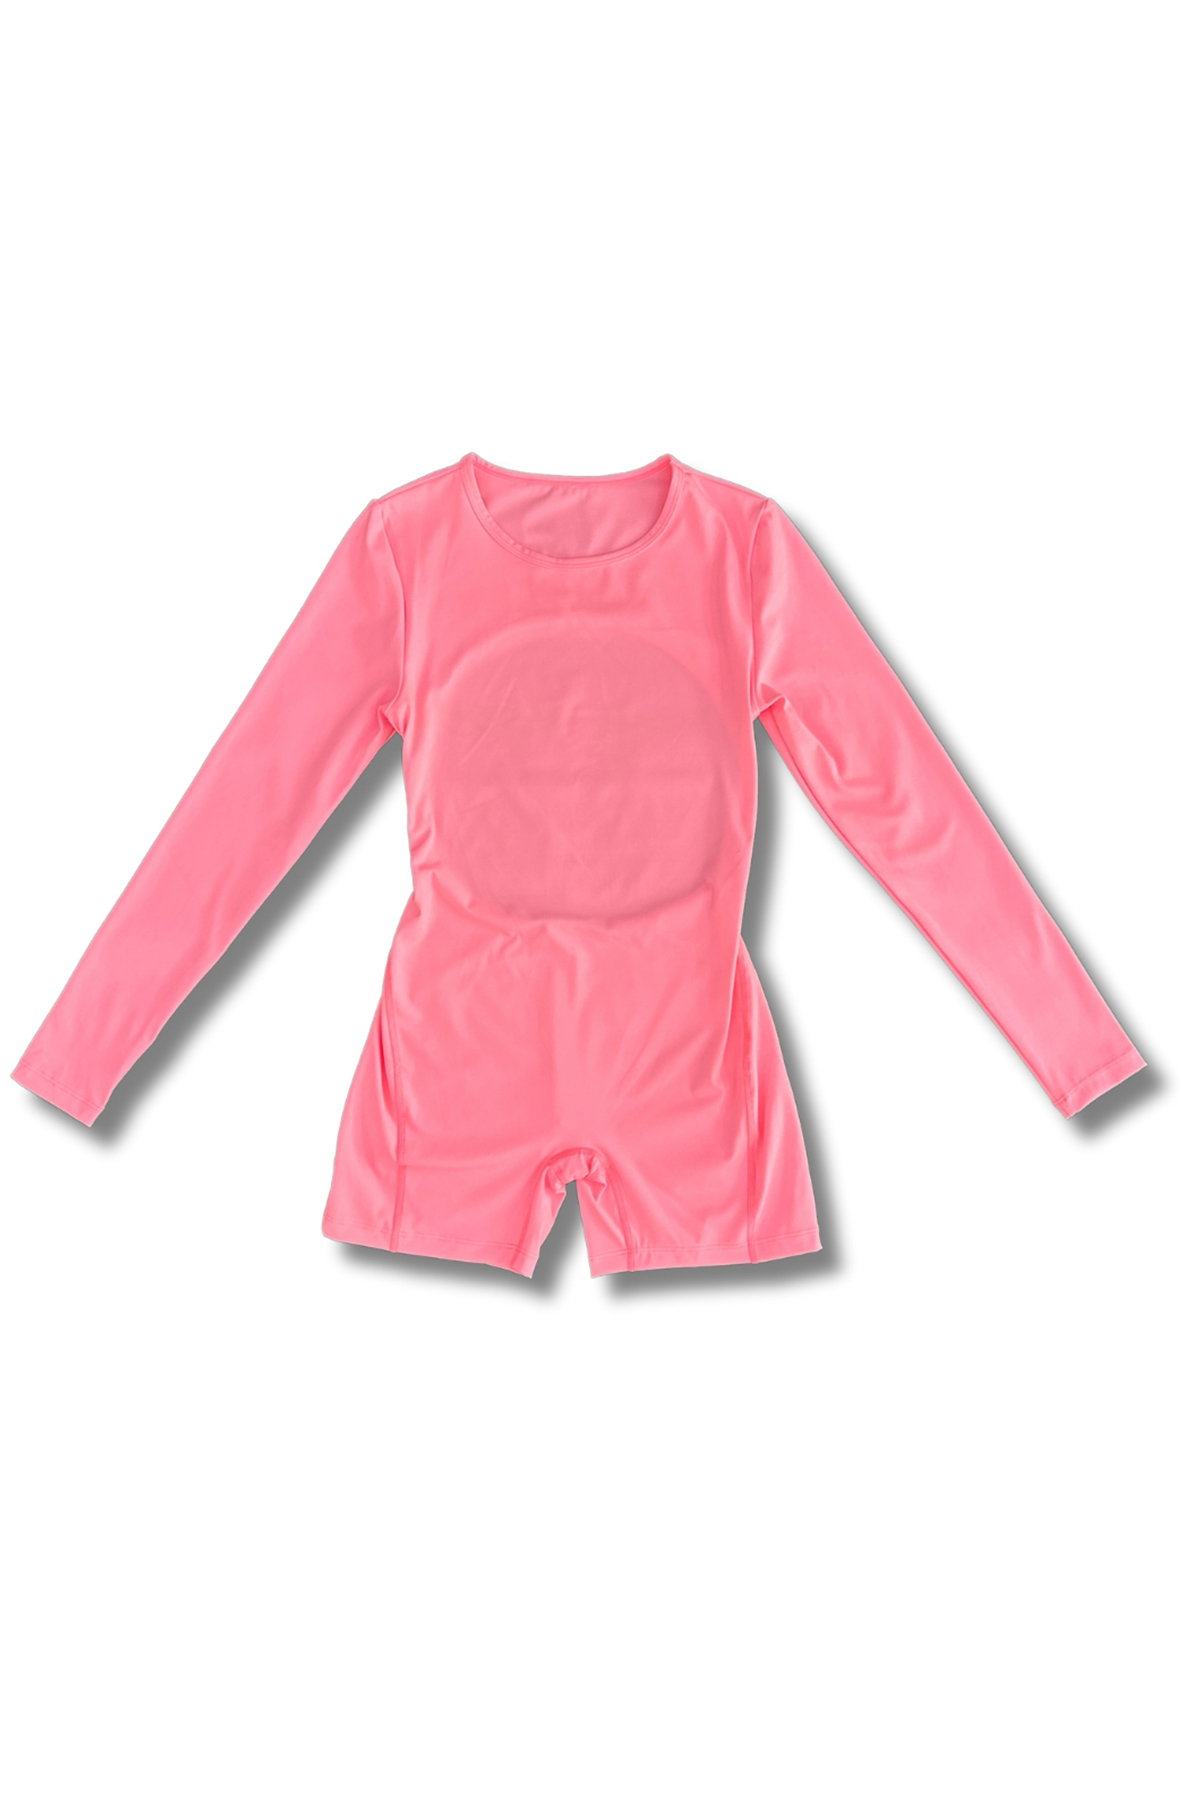 Fitted-Long-sleeved-Mid-Thigh-Yoga-Unitard-pink-front